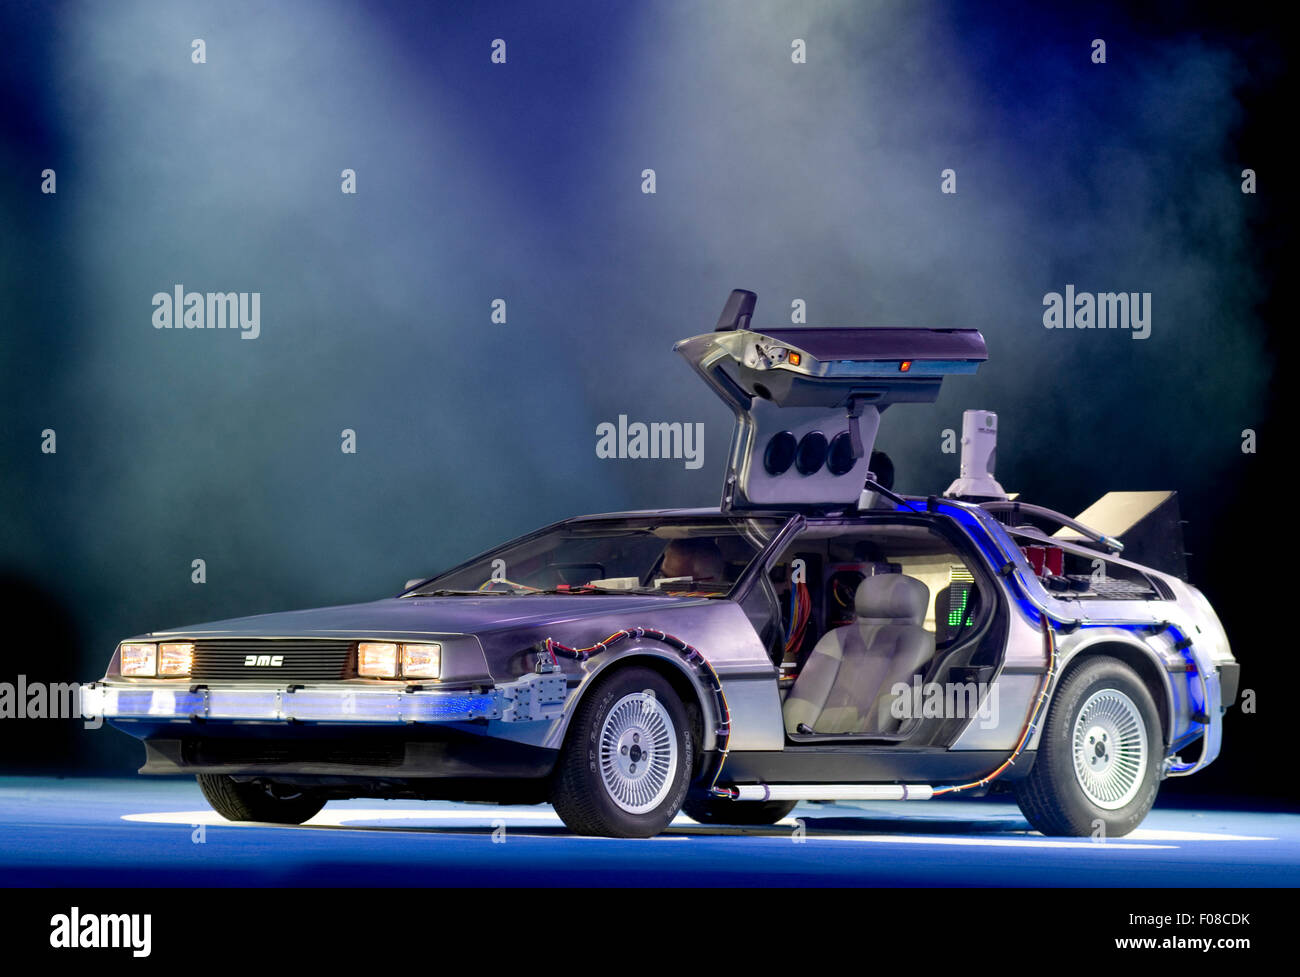 Replica time machine car from Back to the Future on stage at The Gadget  Show Stock Photo - Alamy